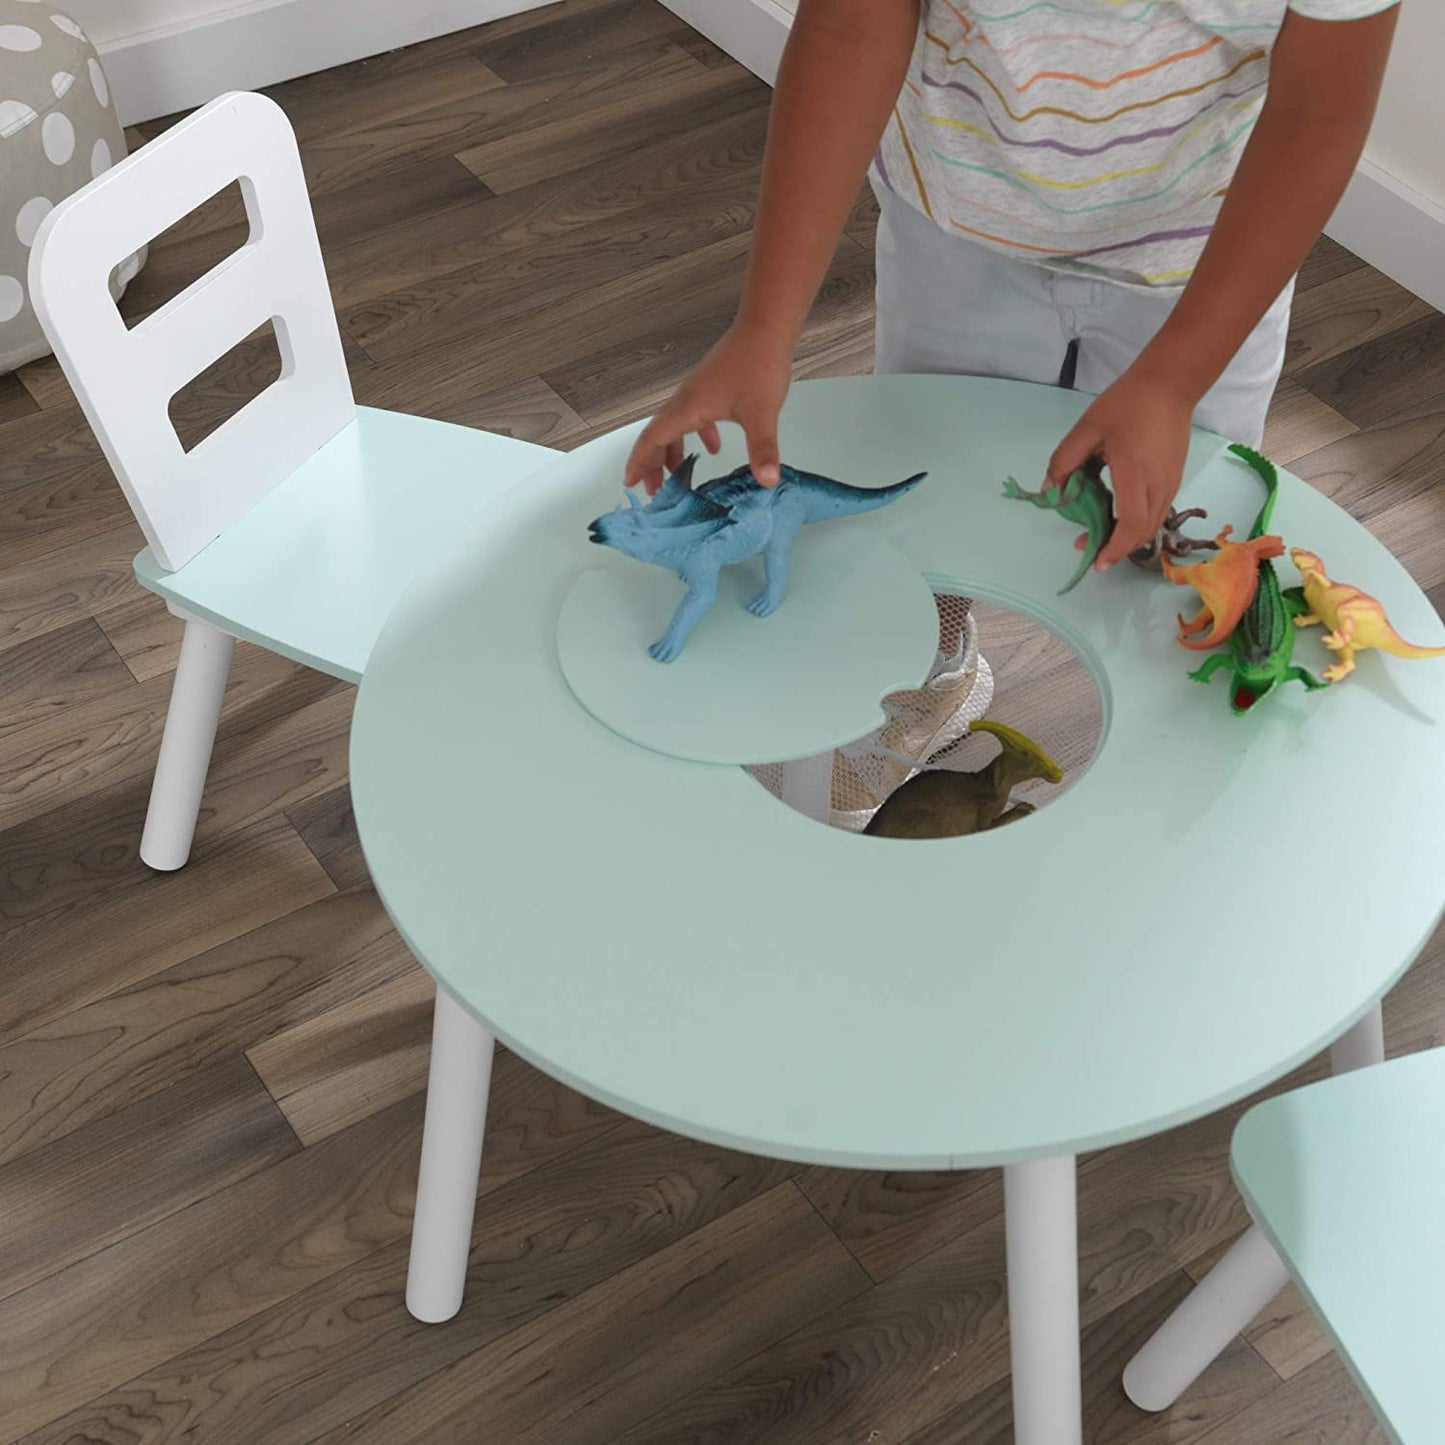 Round Table and 2 Chair Set for children (Mint) - Little Kids Business